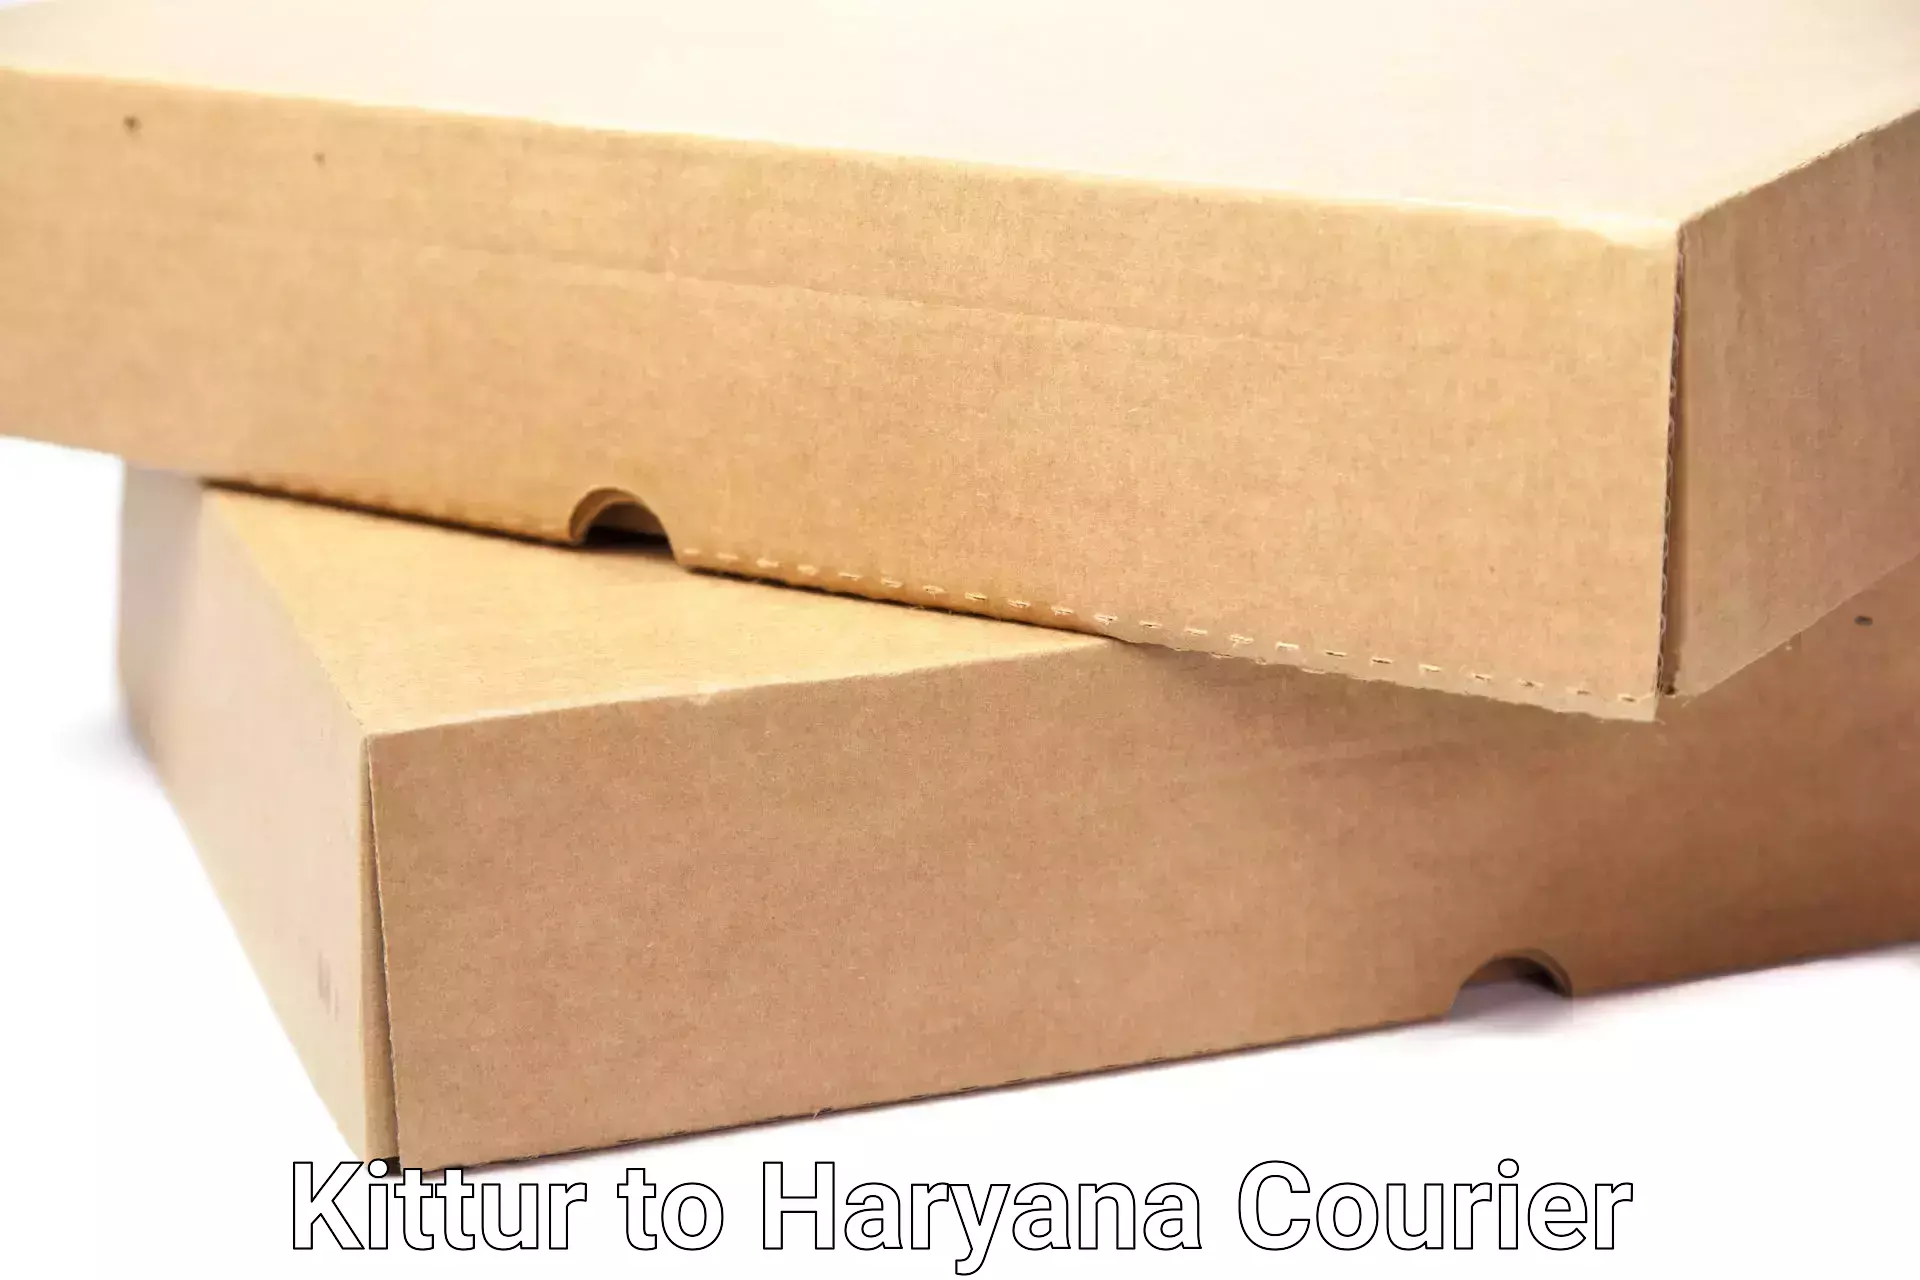 Furniture delivery service Kittur to Pehowa